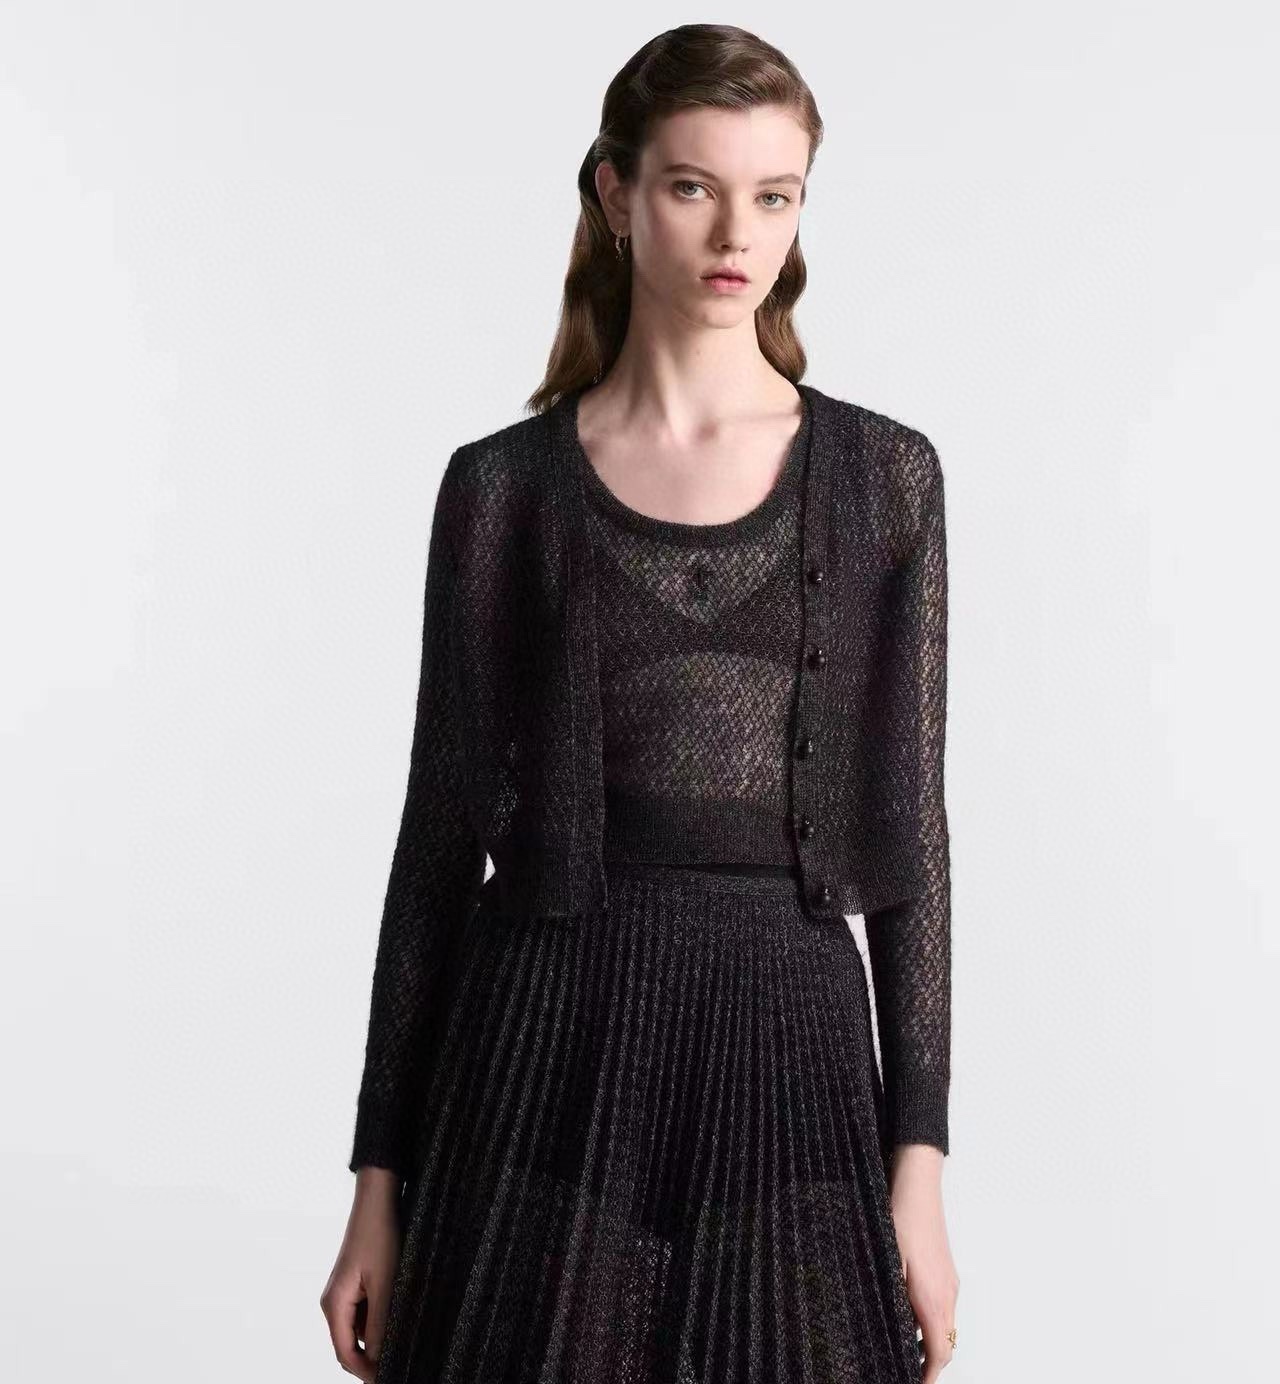 Dior Clothing Tank Tops&Camis Same as Original
 Embroidery Knitting Fall Collection